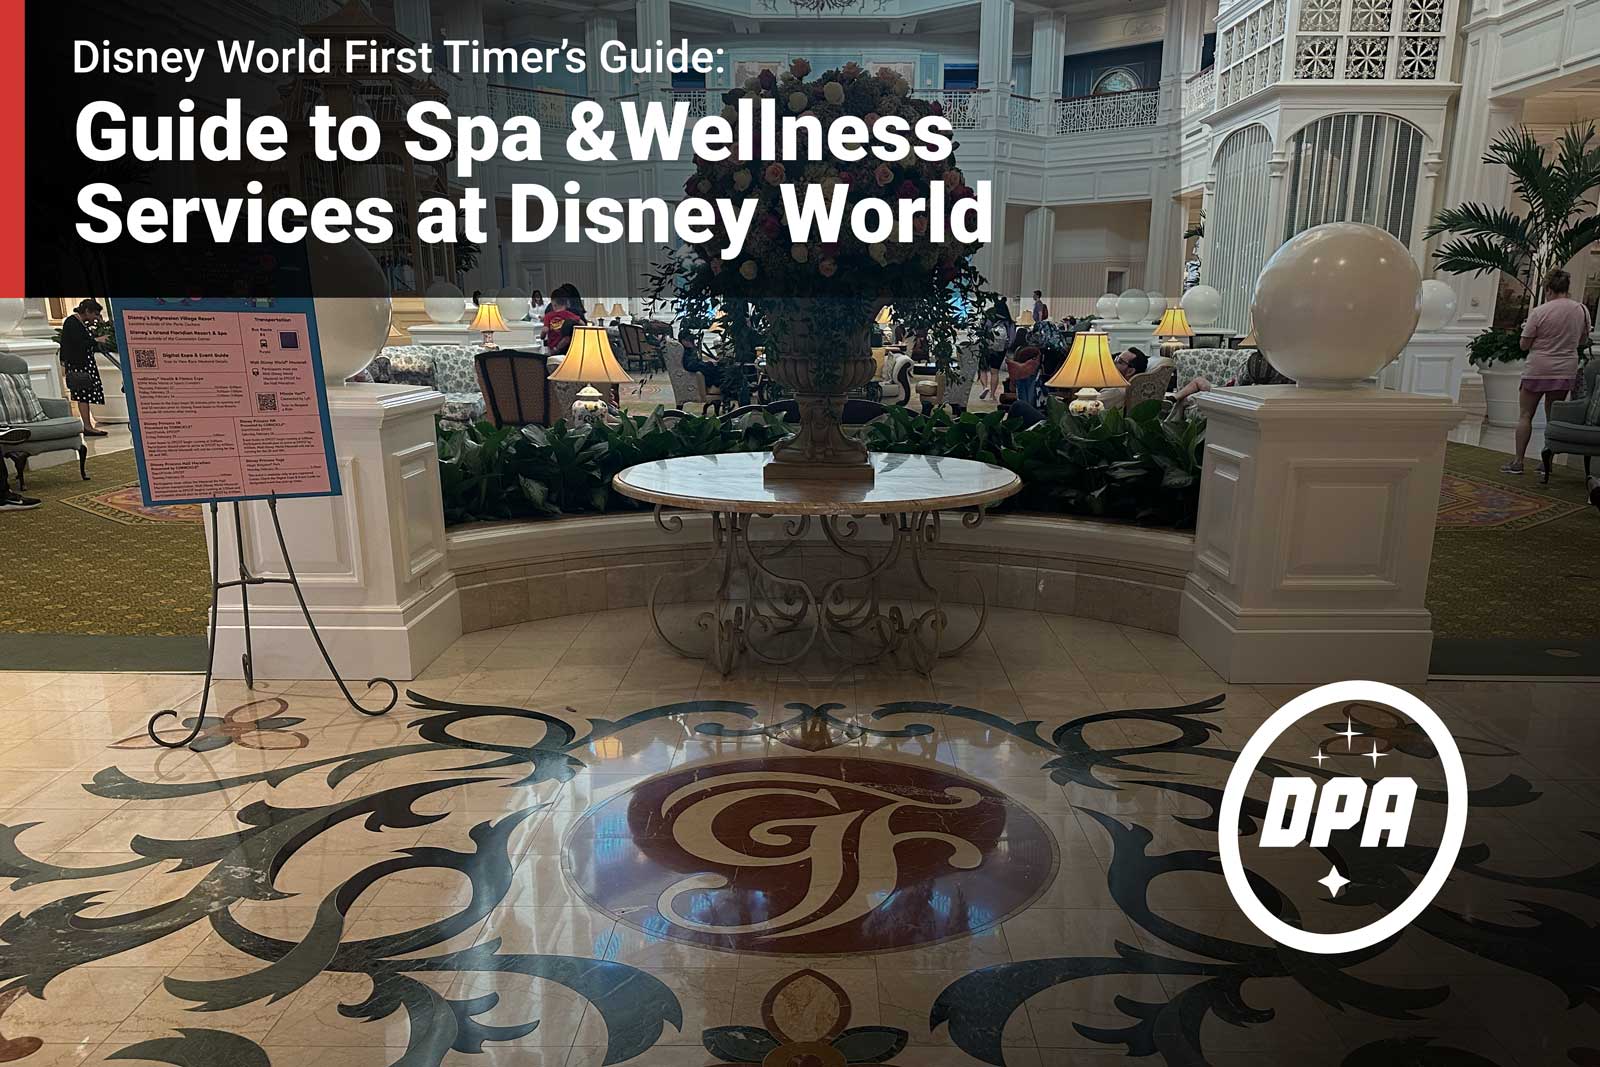 Guide to Spa and Wellness Services for First Time Visitors at Walt Disney World